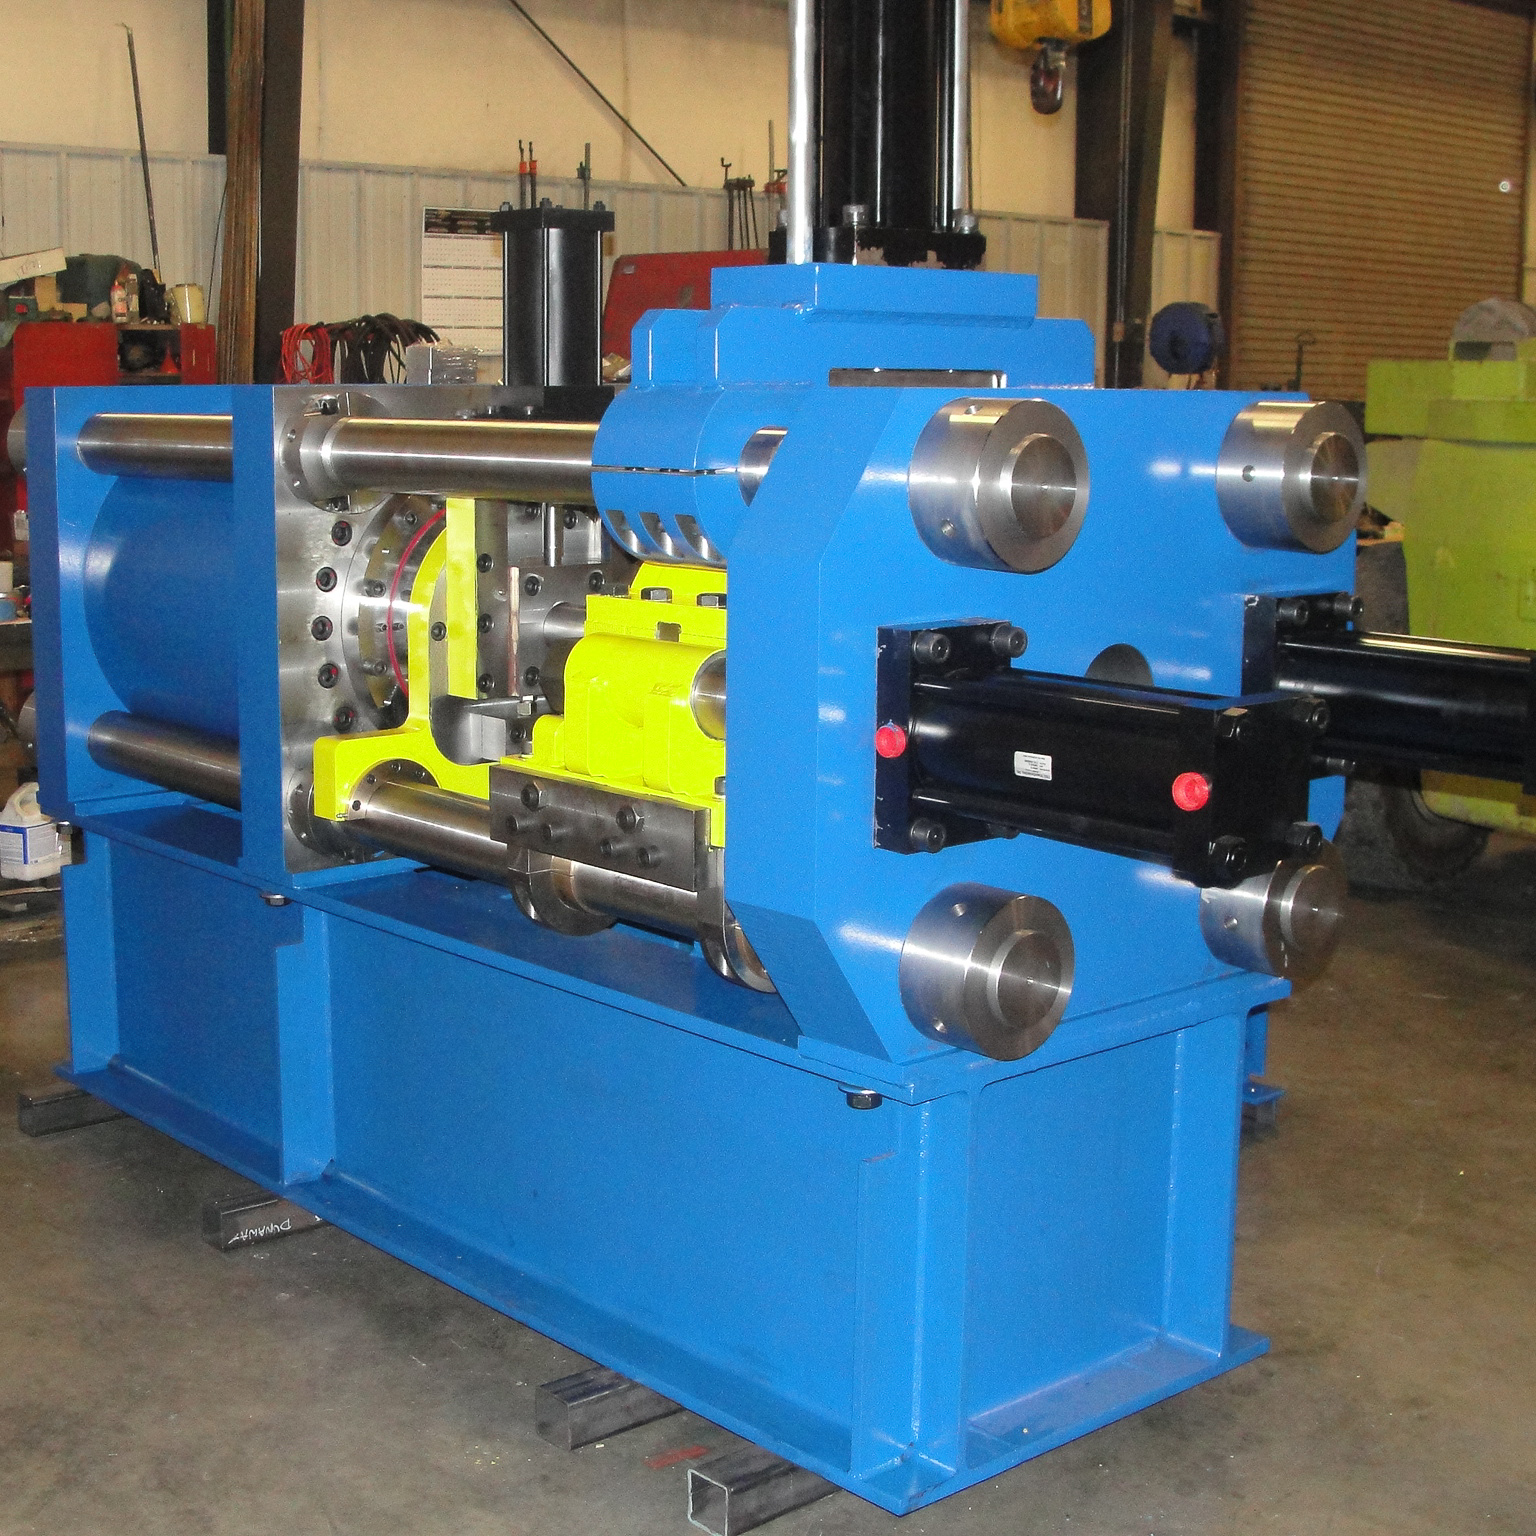 Extrusion press constructed at Dunaway, Inc.